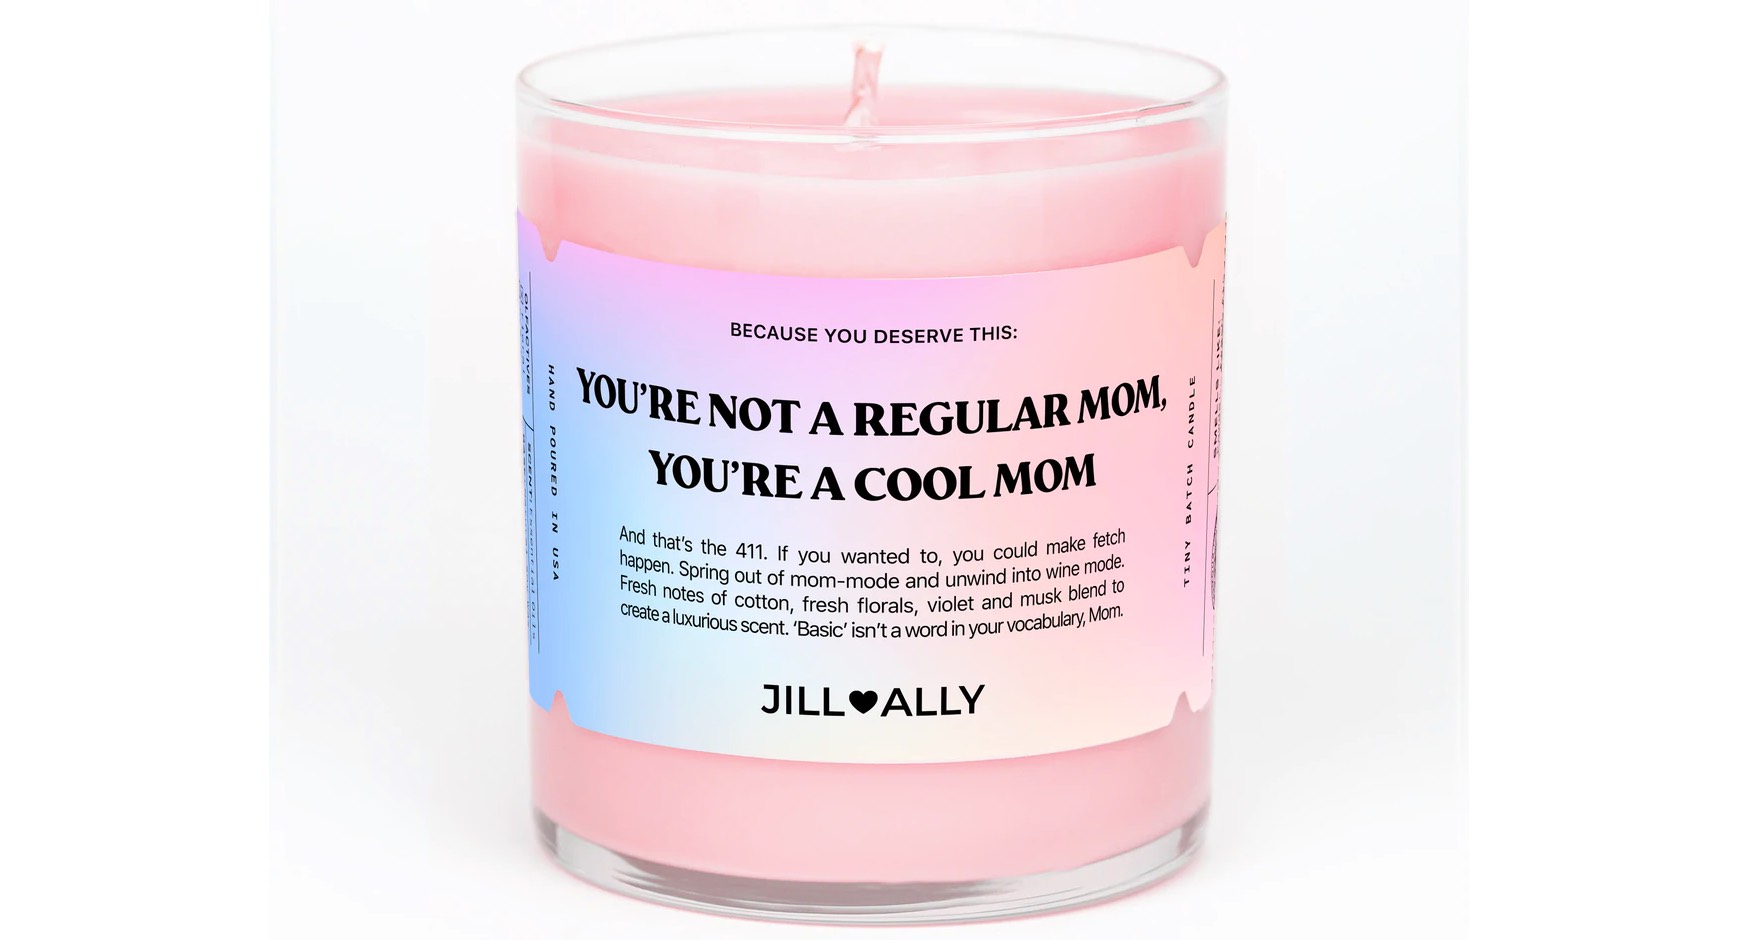 Real Housewives of New York City Star Jill Zarin, Daughter Ally Shapiro Introduce Crystal Manifestation Candles for Mother’s Day